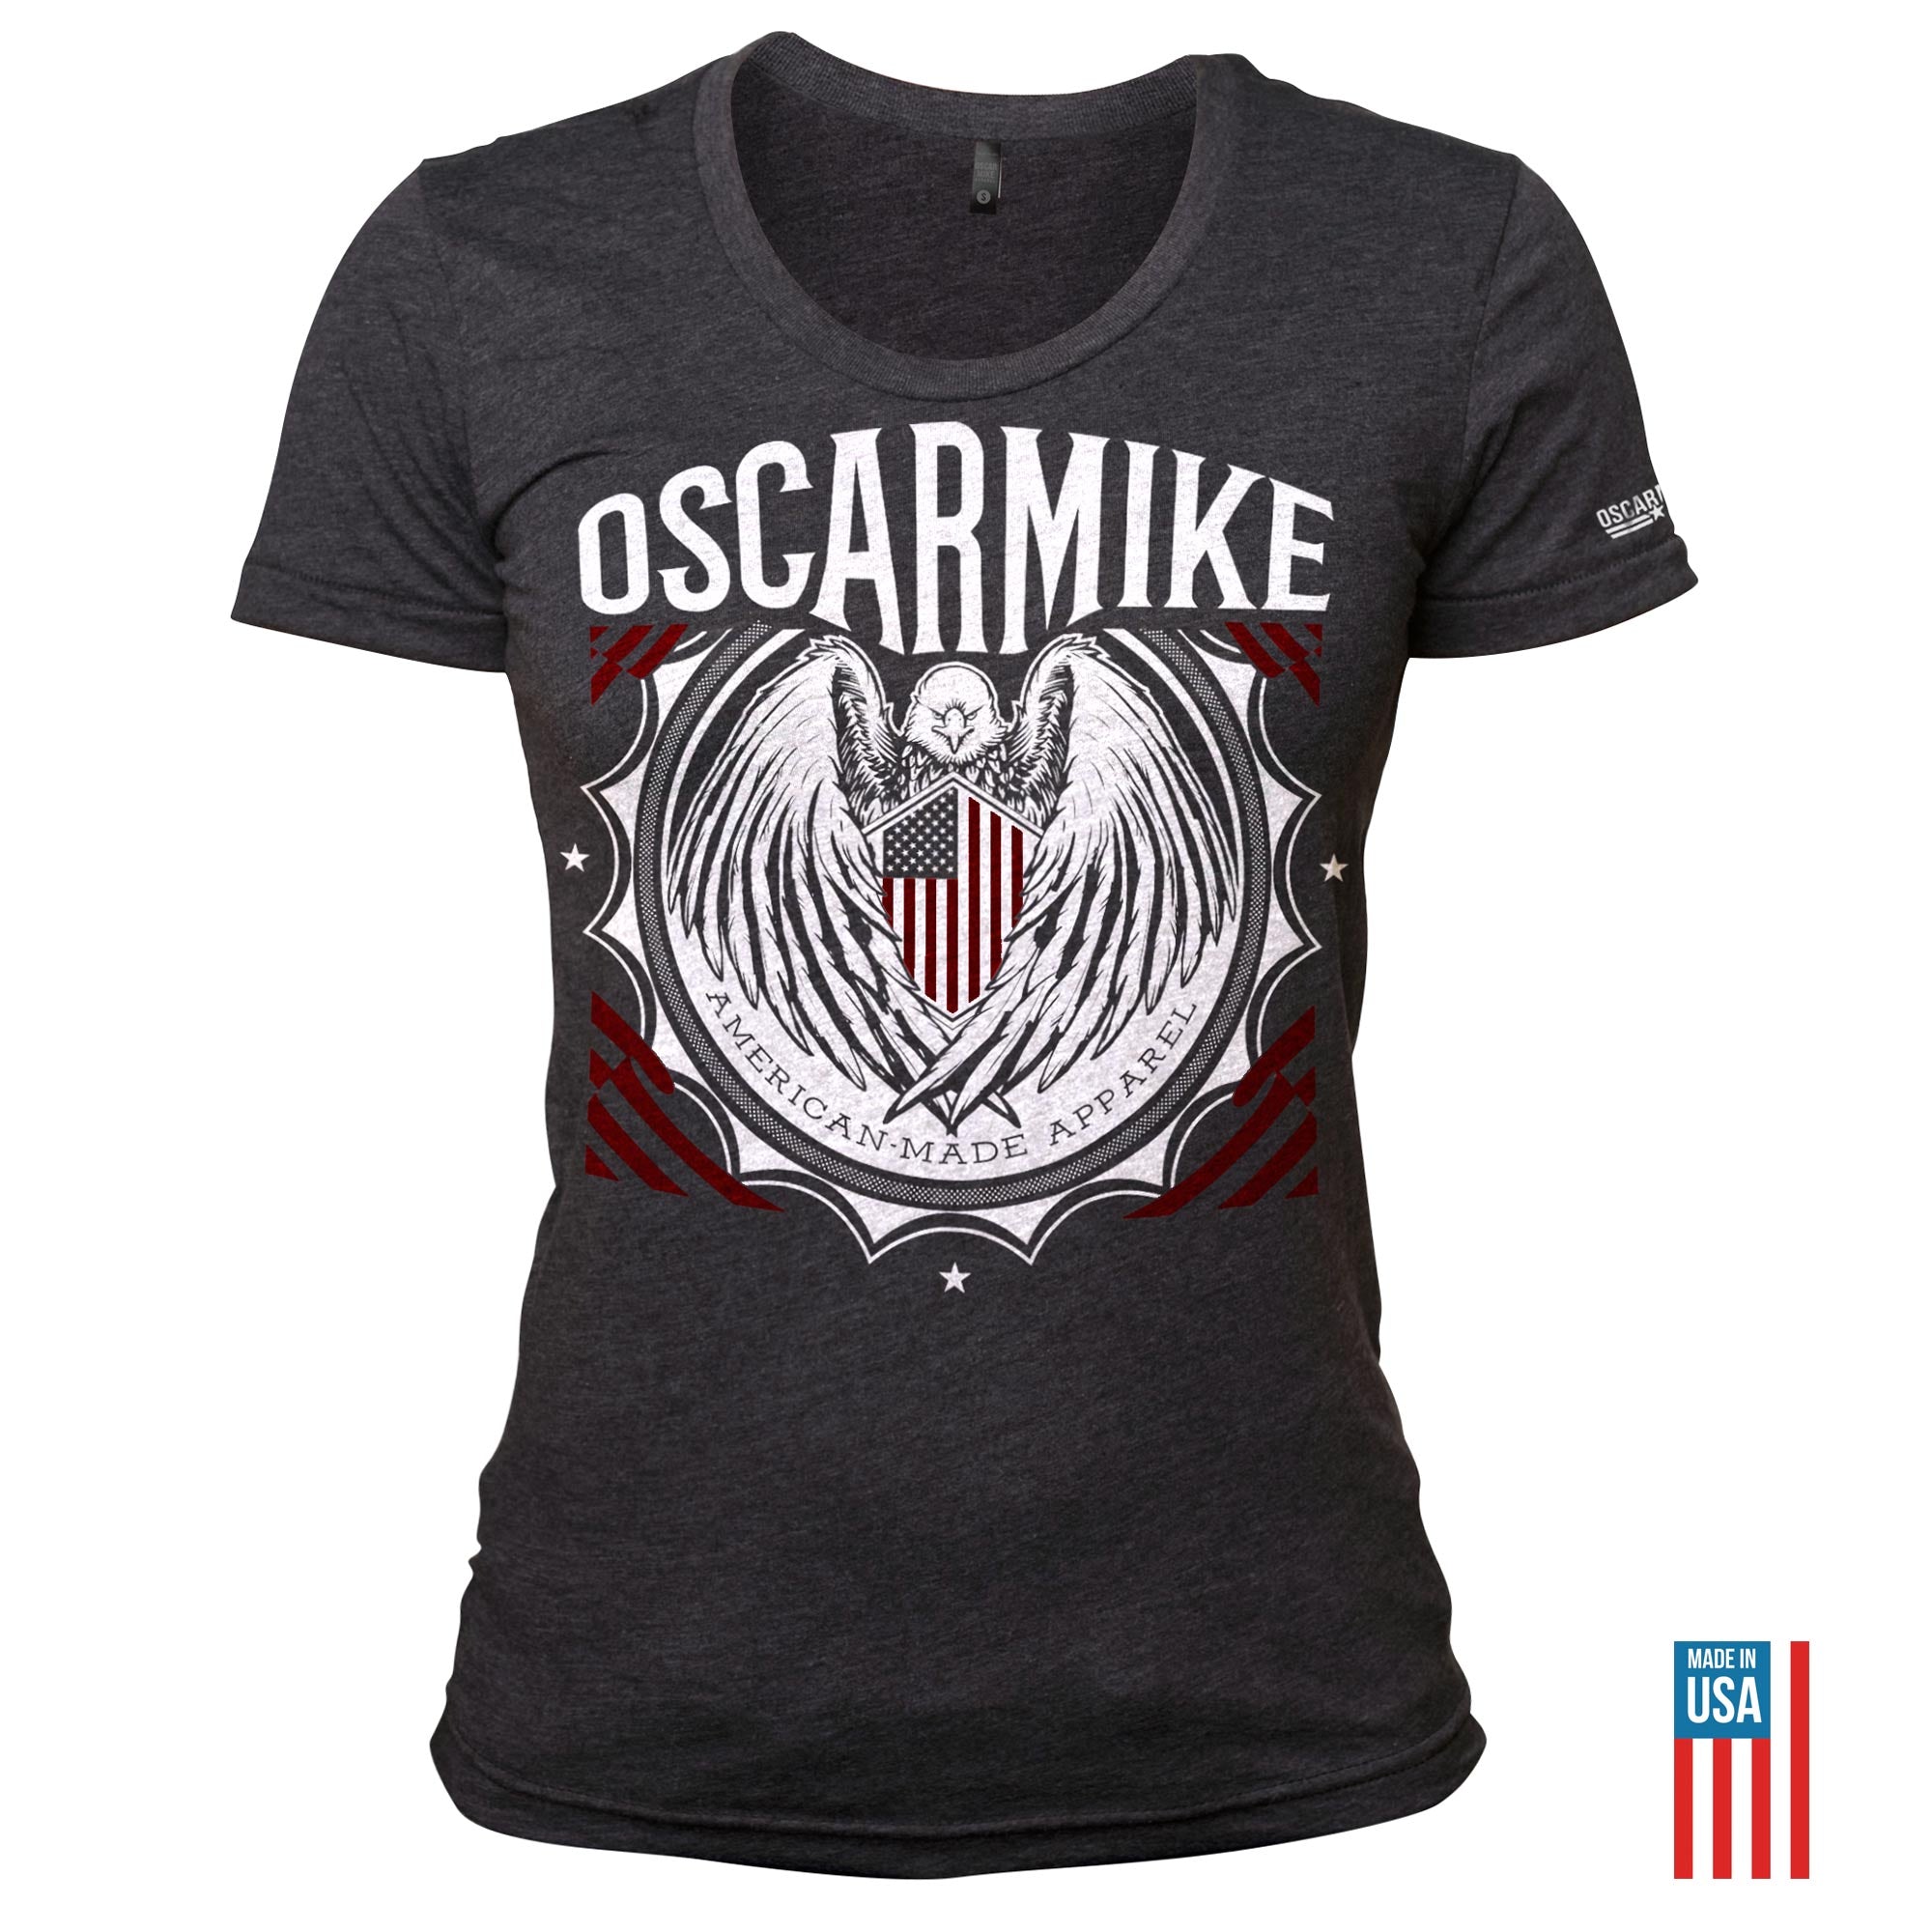 Women's OM American Eagle Tee T-Shirt from Oscar Mike Apparel